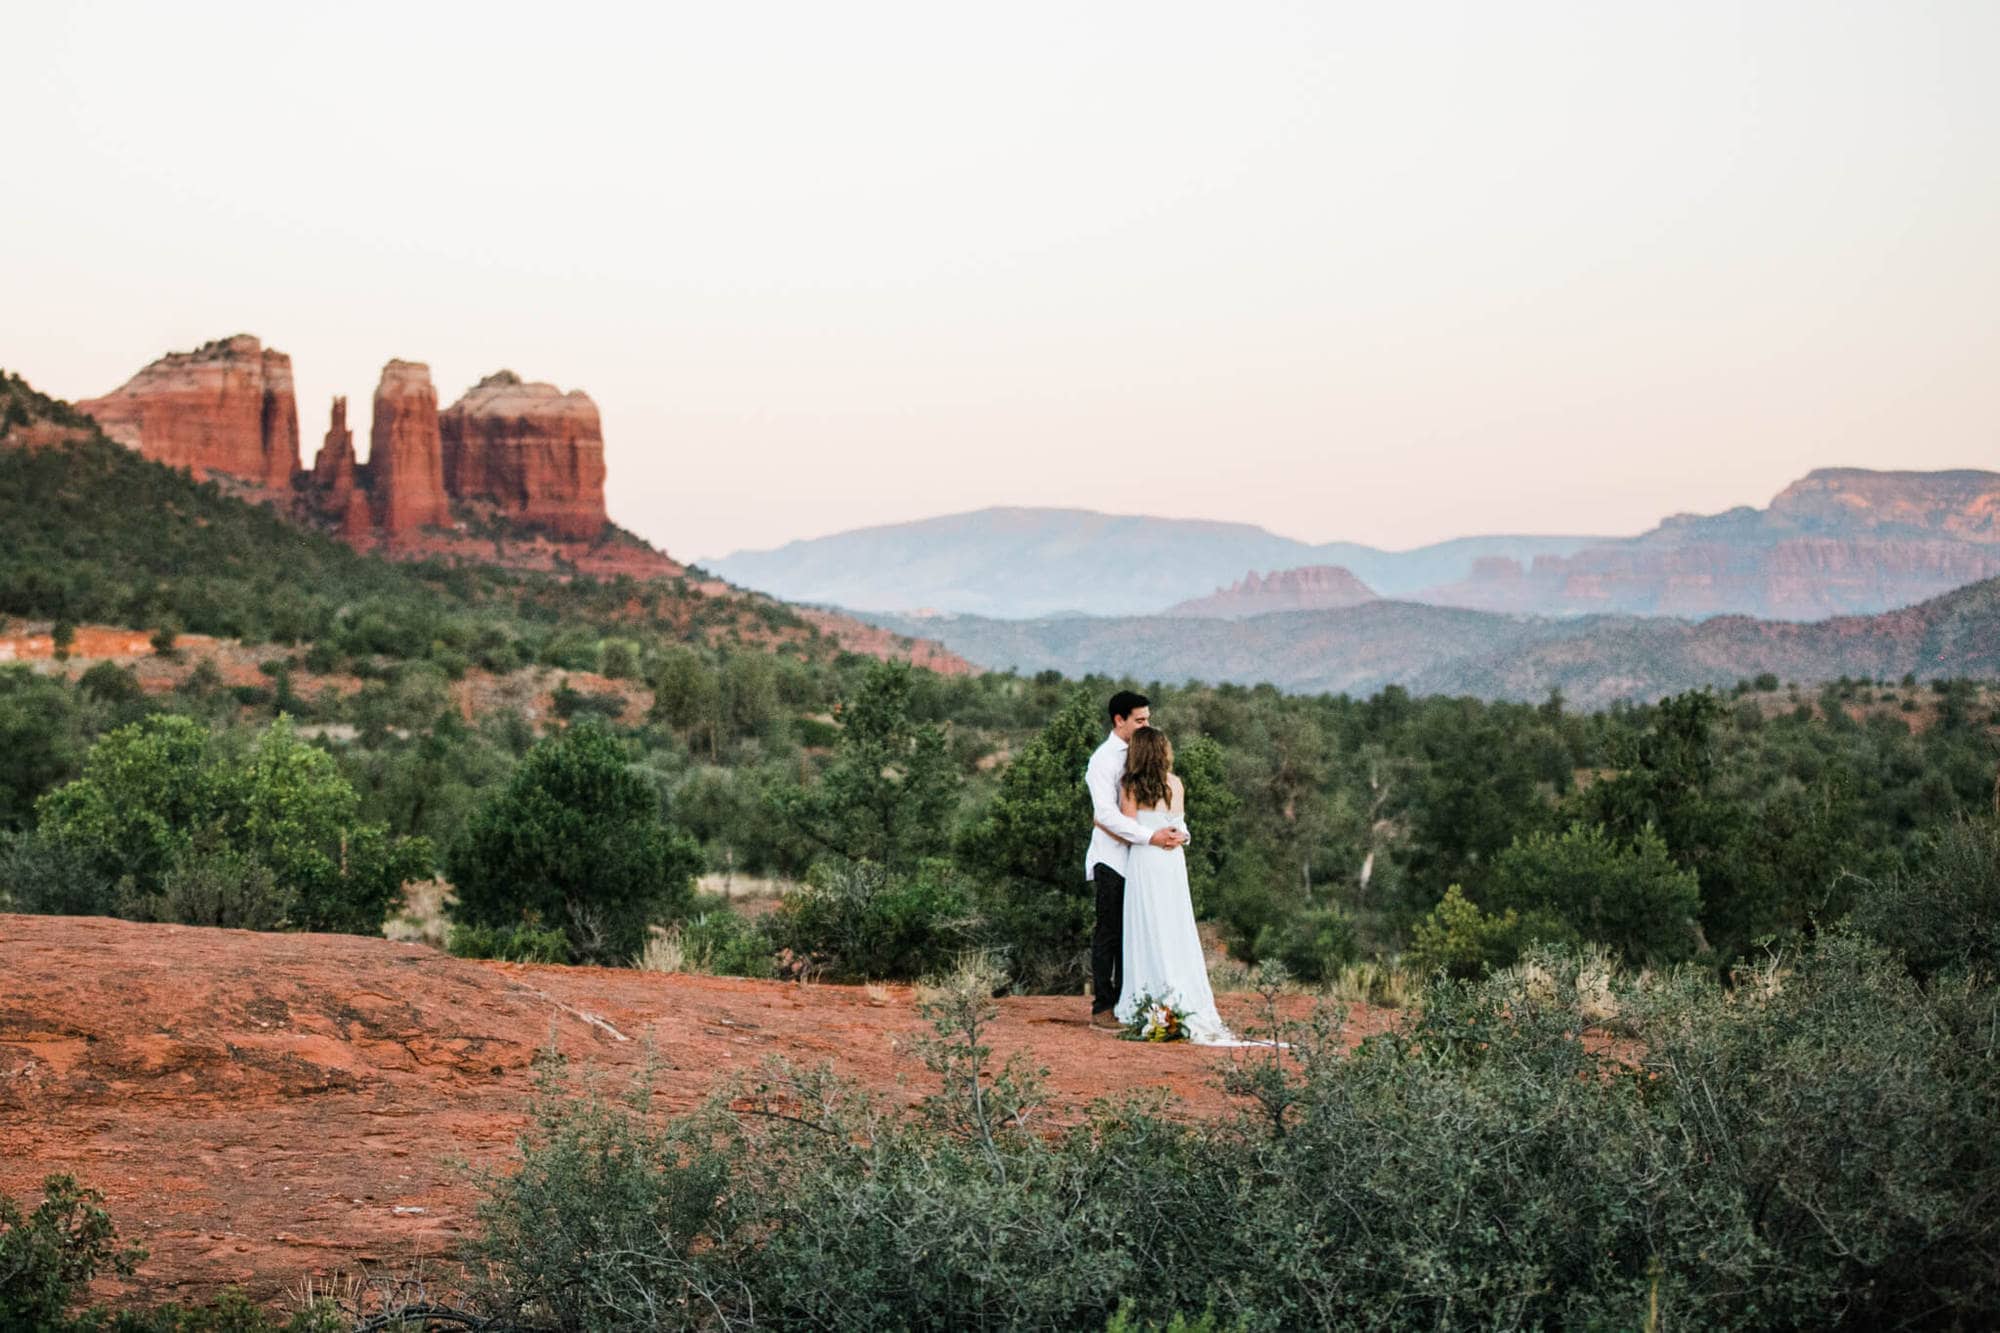 With Cathedral Rock behind them, the bride and groom look out over Sedona as the sun starts to rise.